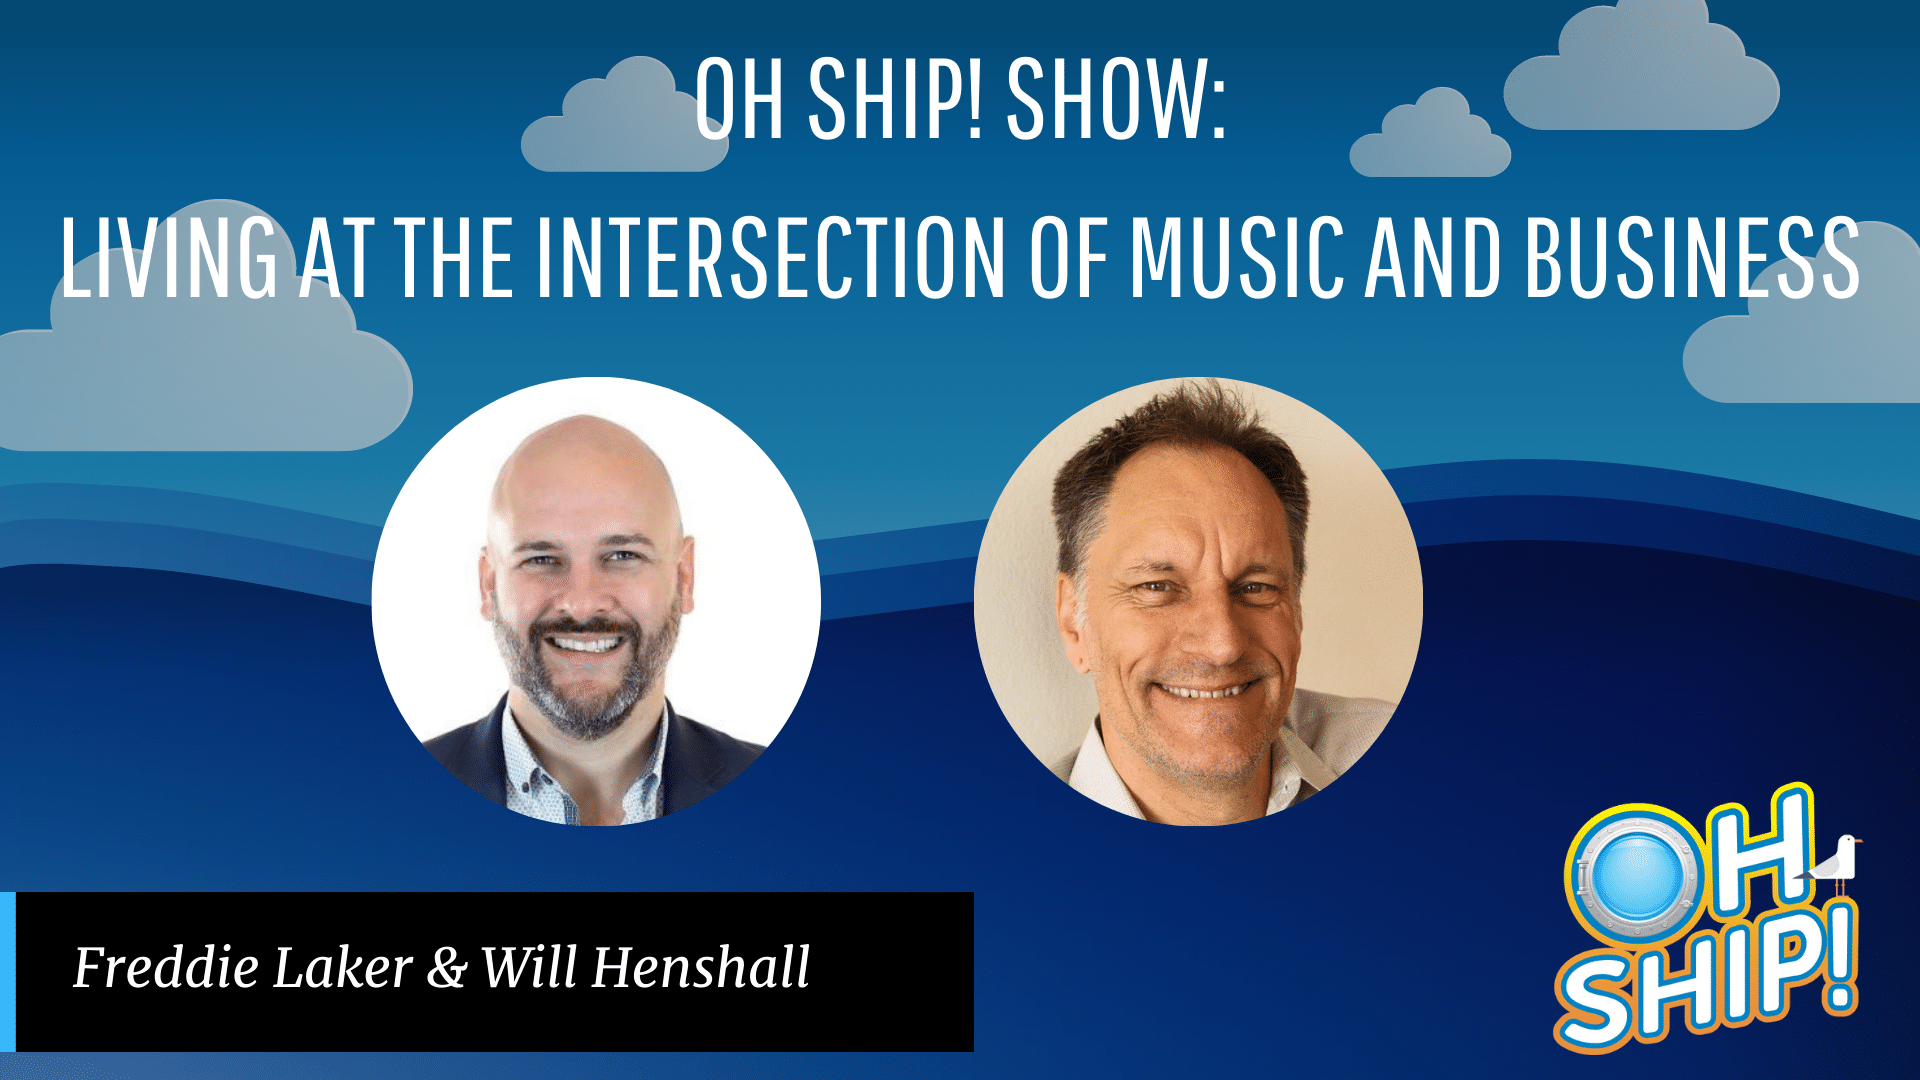 A promotional graphic for the OH SHIP! SHOW featuring the title "Living at the Intersection of Music and Business." It shows two headshots, one labeled Freddie Laker and the other Will Henshall. The background is a blue sky with clouds, with the show's logo in the bottom right. Join us for insights on music and business!